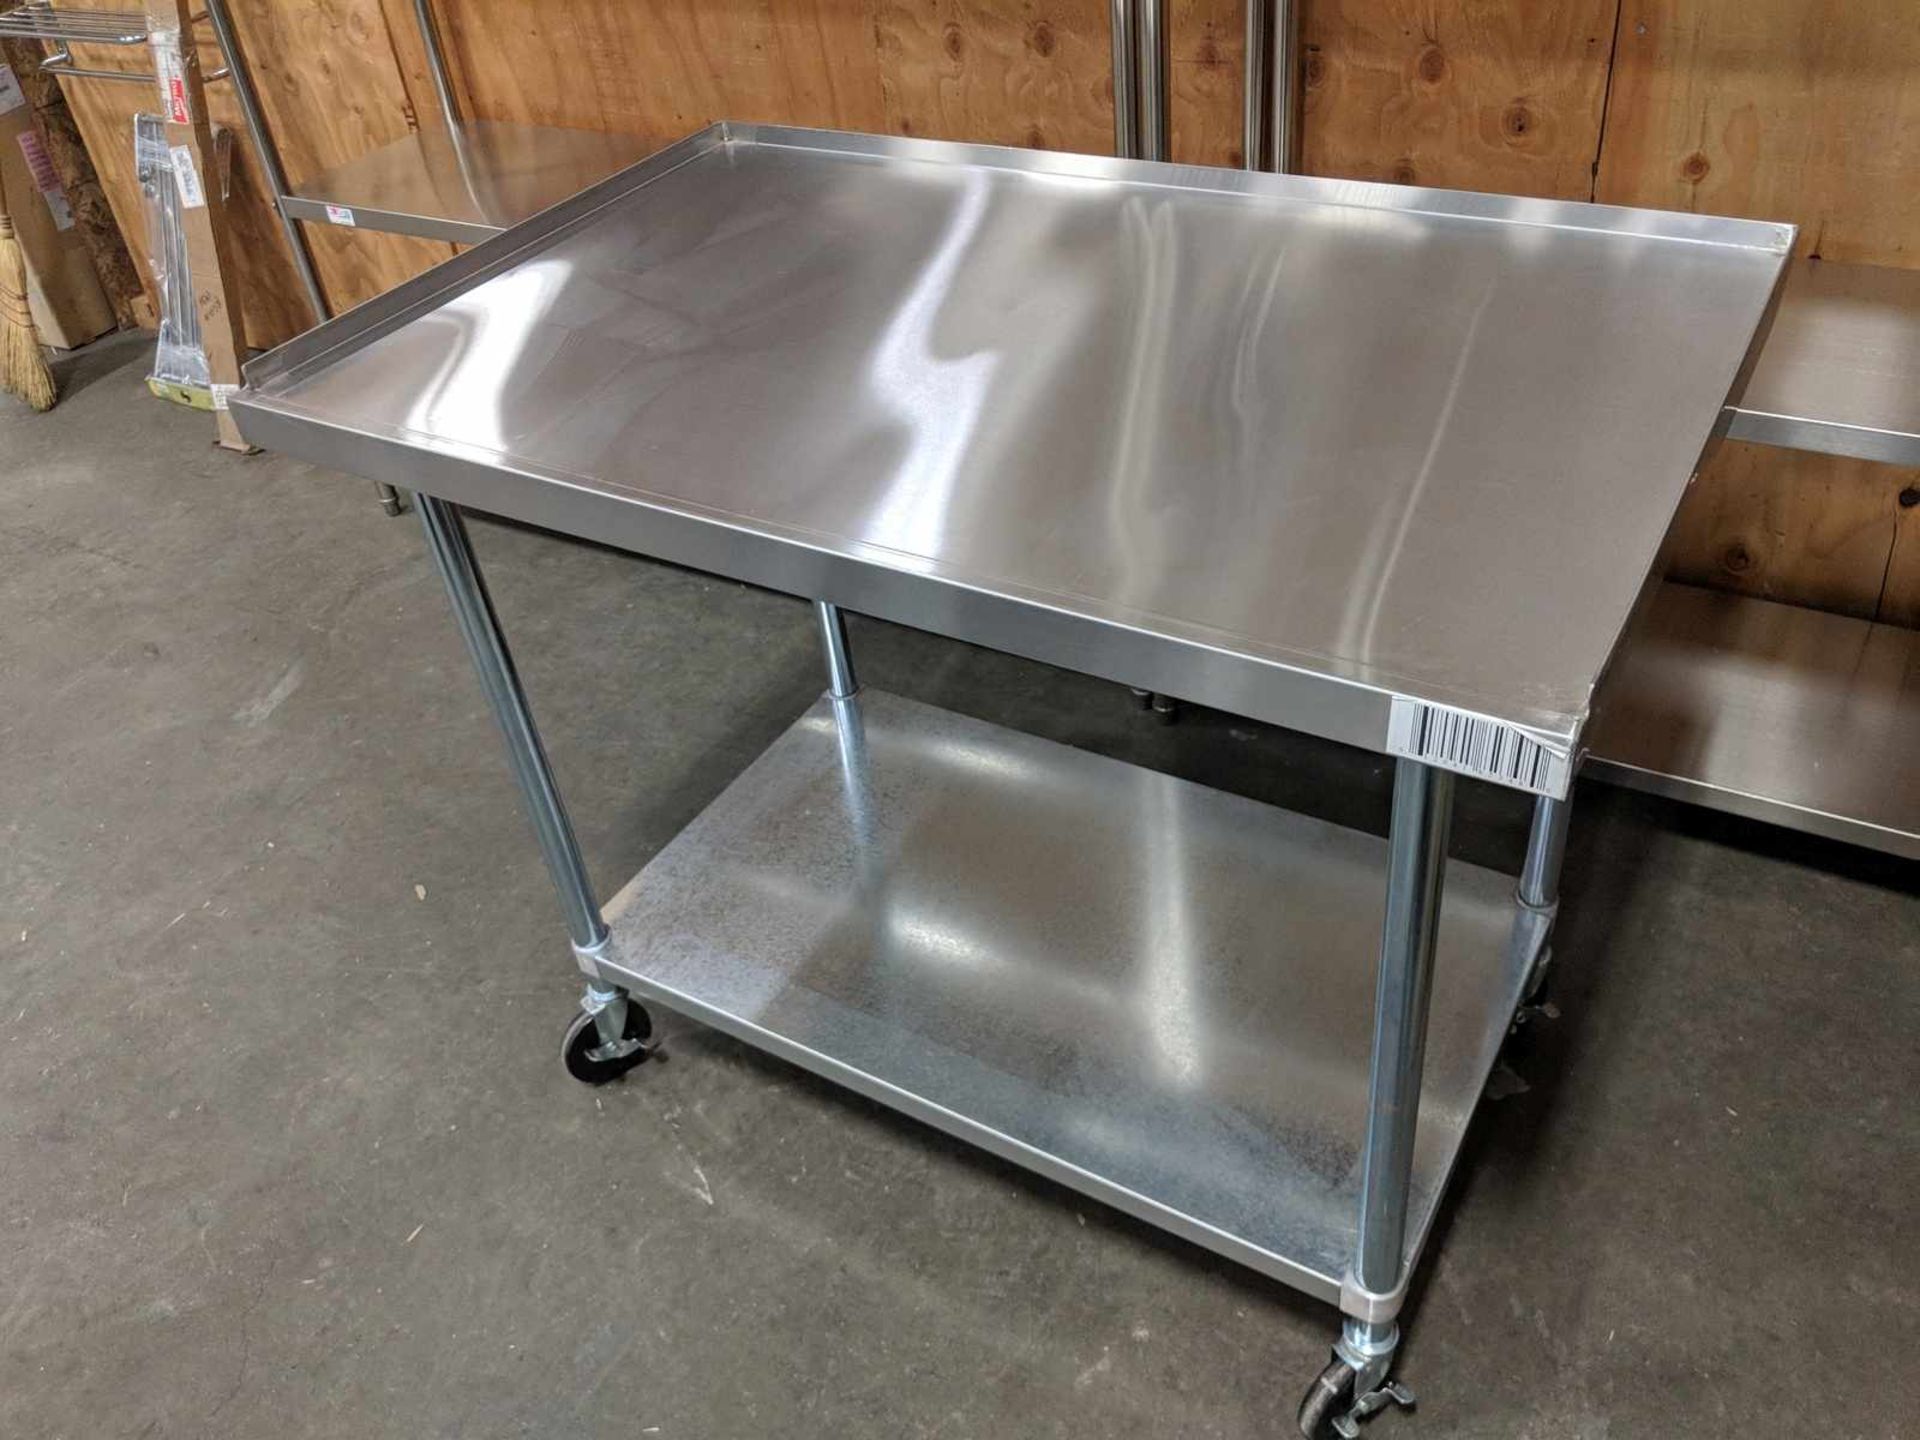 30" x 49" x 40" Work Table with 1" Lip and Casters